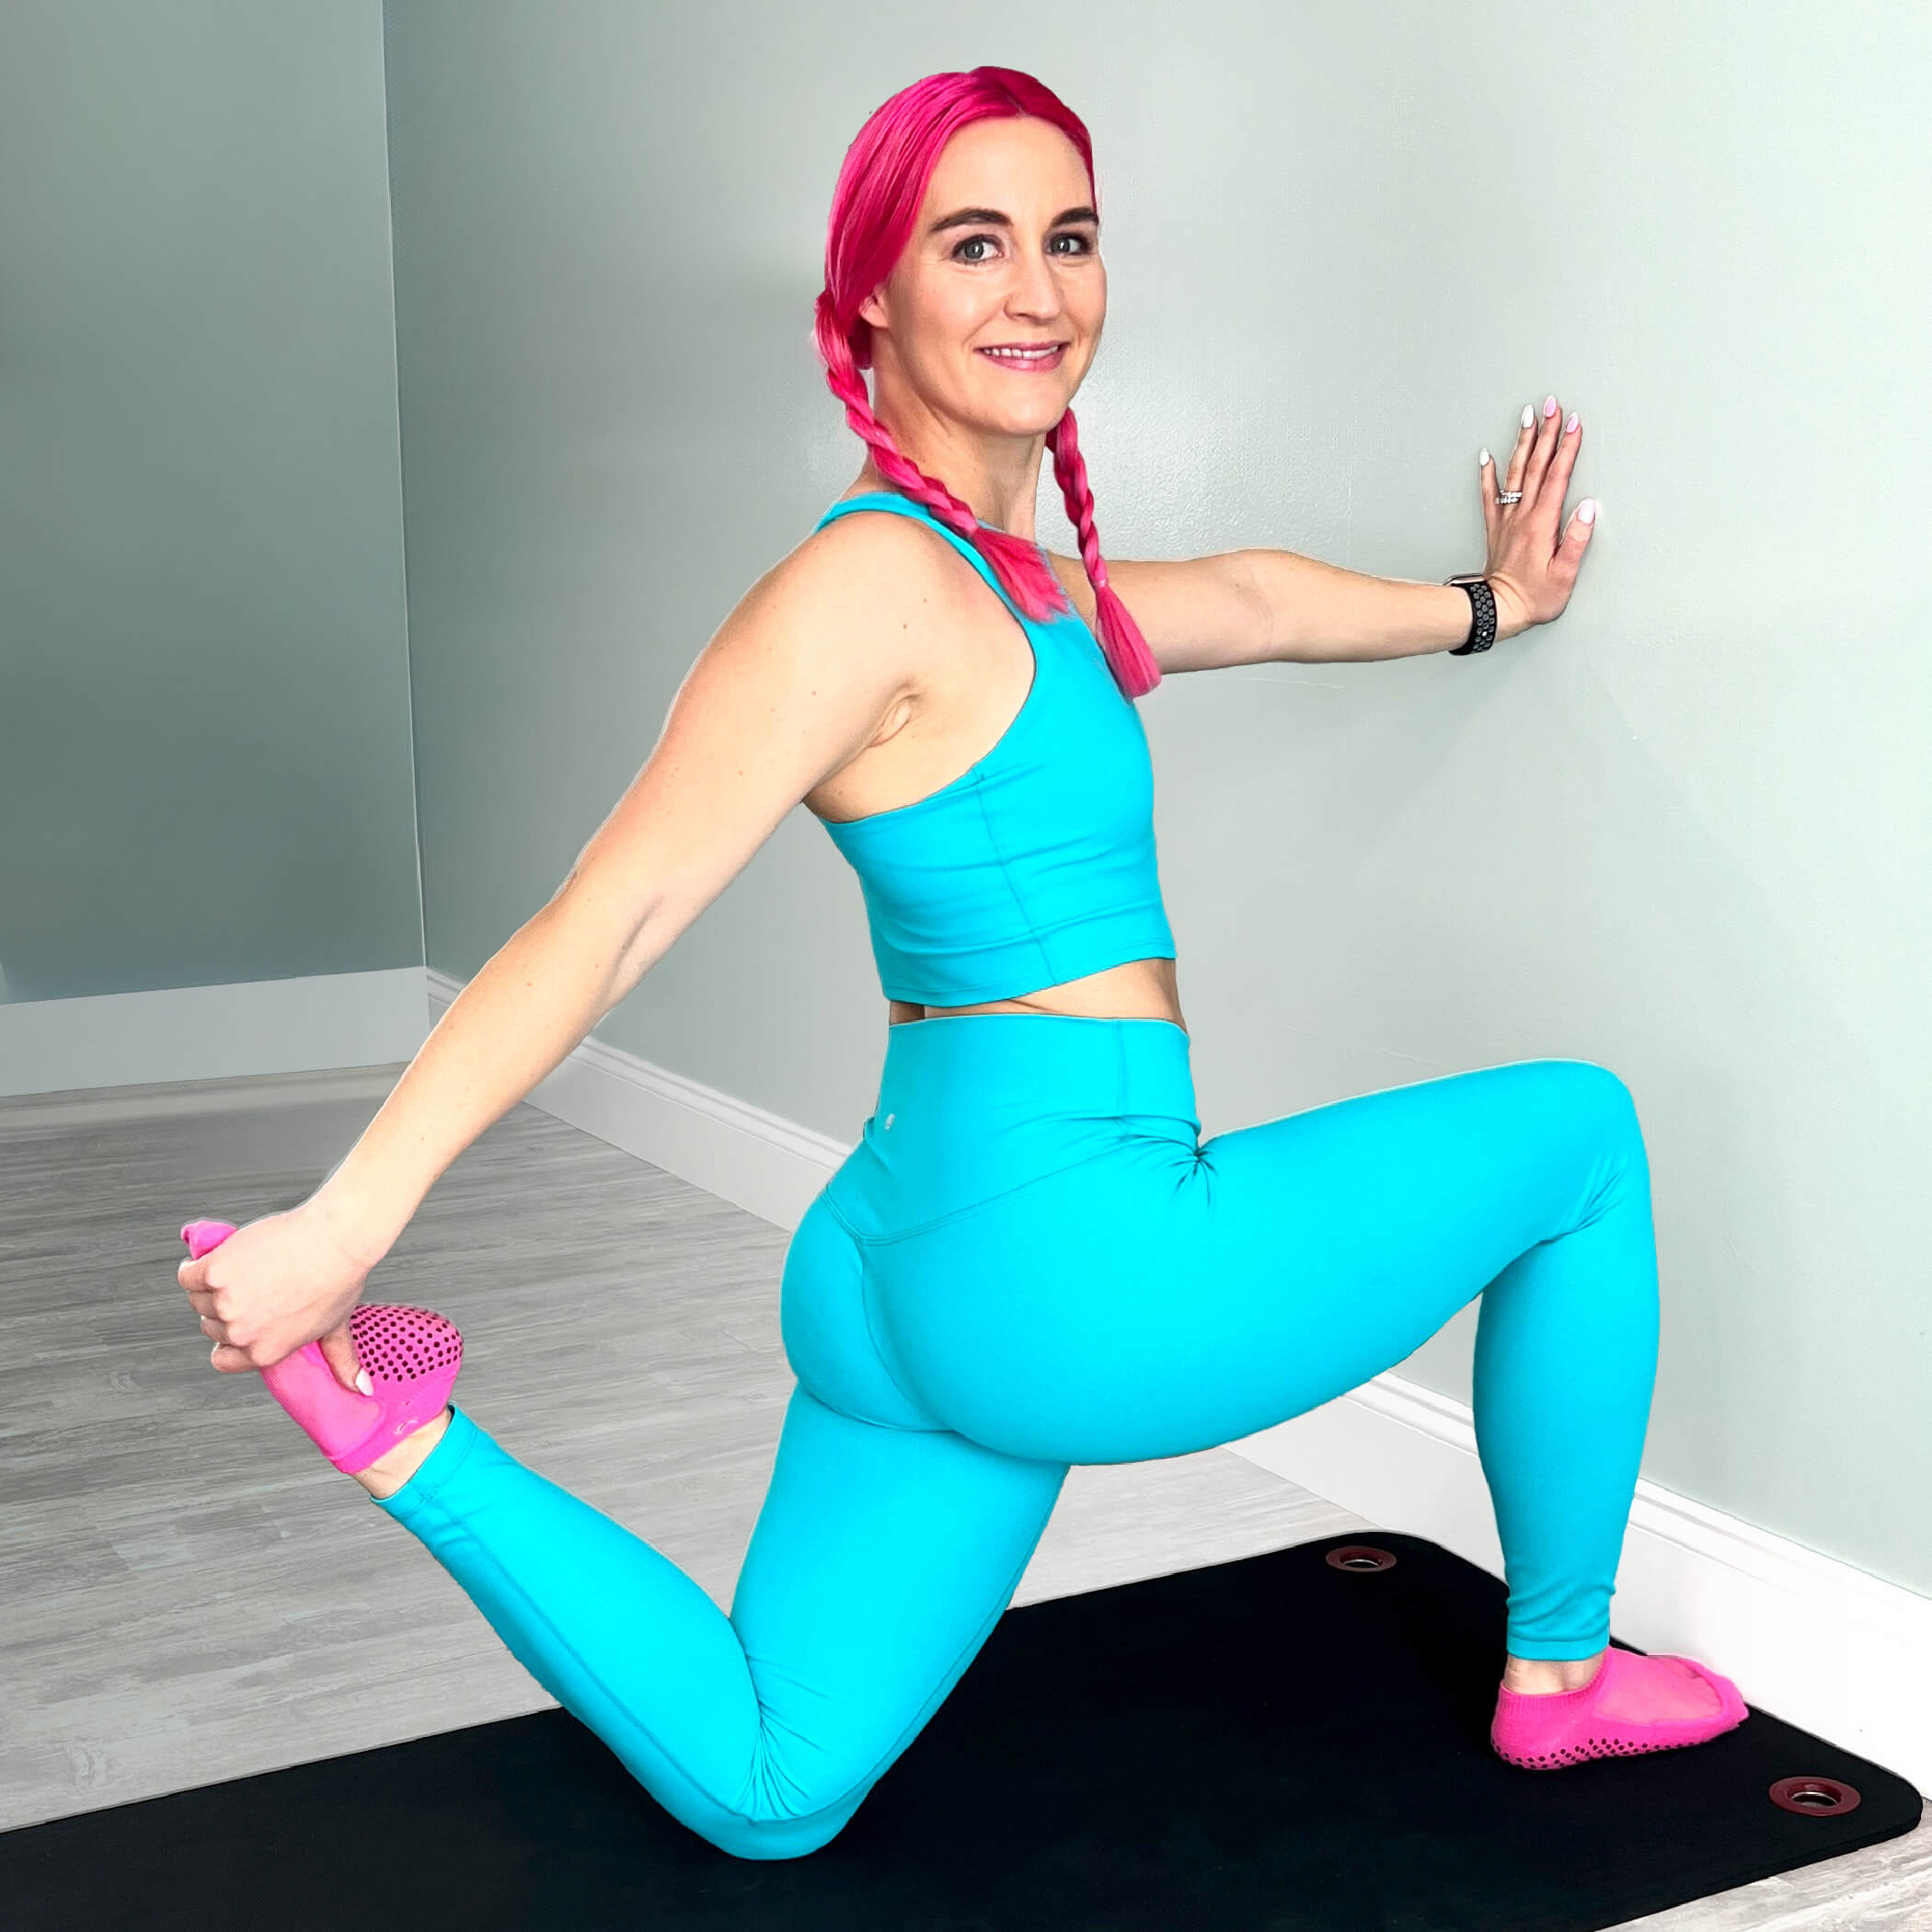 Free 28-Day Wall Pilates Challenge for Beginners on YouTube with Daily Pilates Workout Calendar PDF 3 - PILATES BODY by Kayla